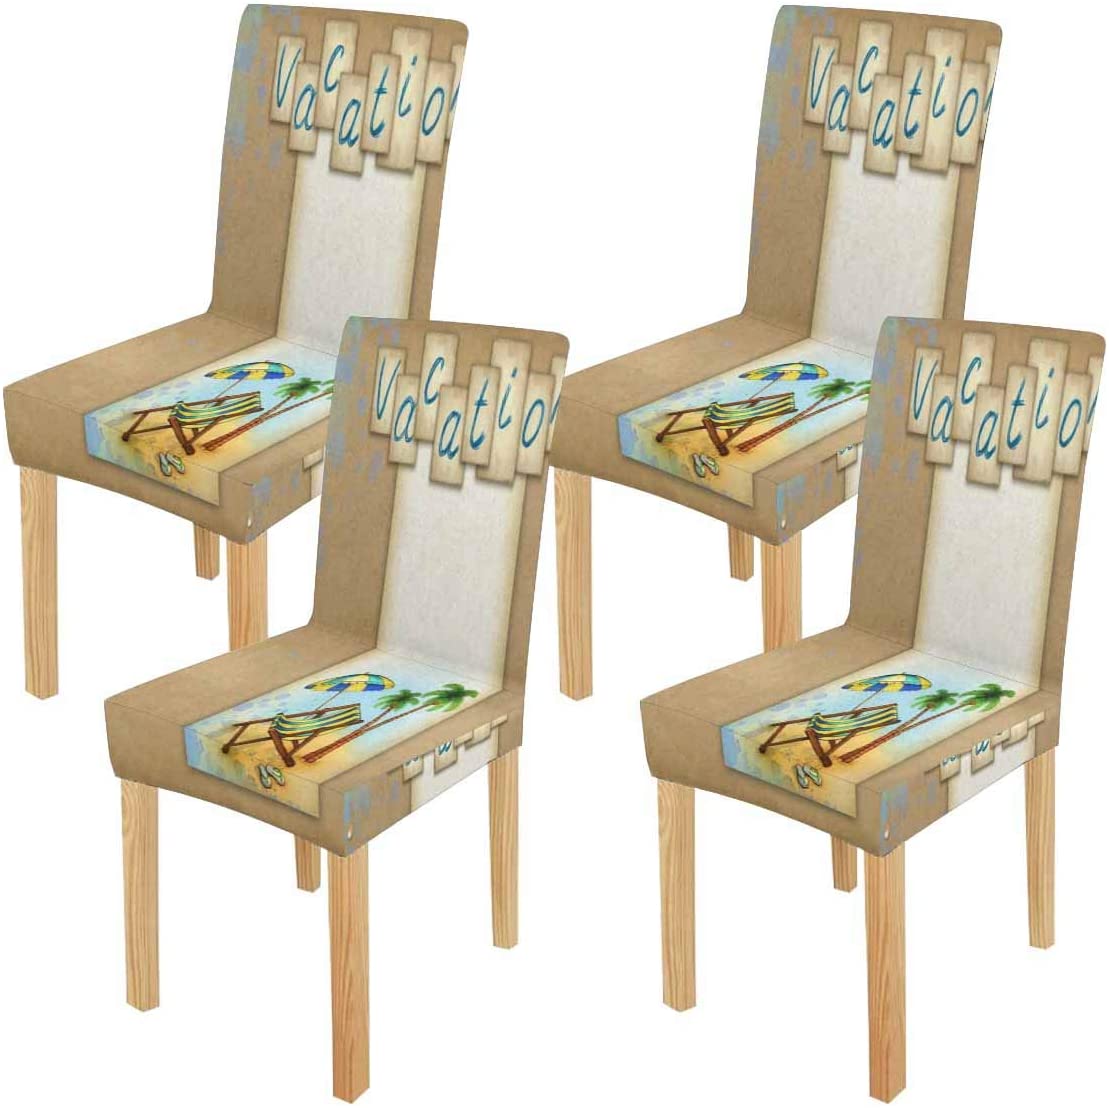 KXMDXA Card with Drawing of Chaise Lounge Stretch Chair Cover Protector Seat Slipcover for Dining Room Hotel Wedding Party Set of 4 - image 1 of 6